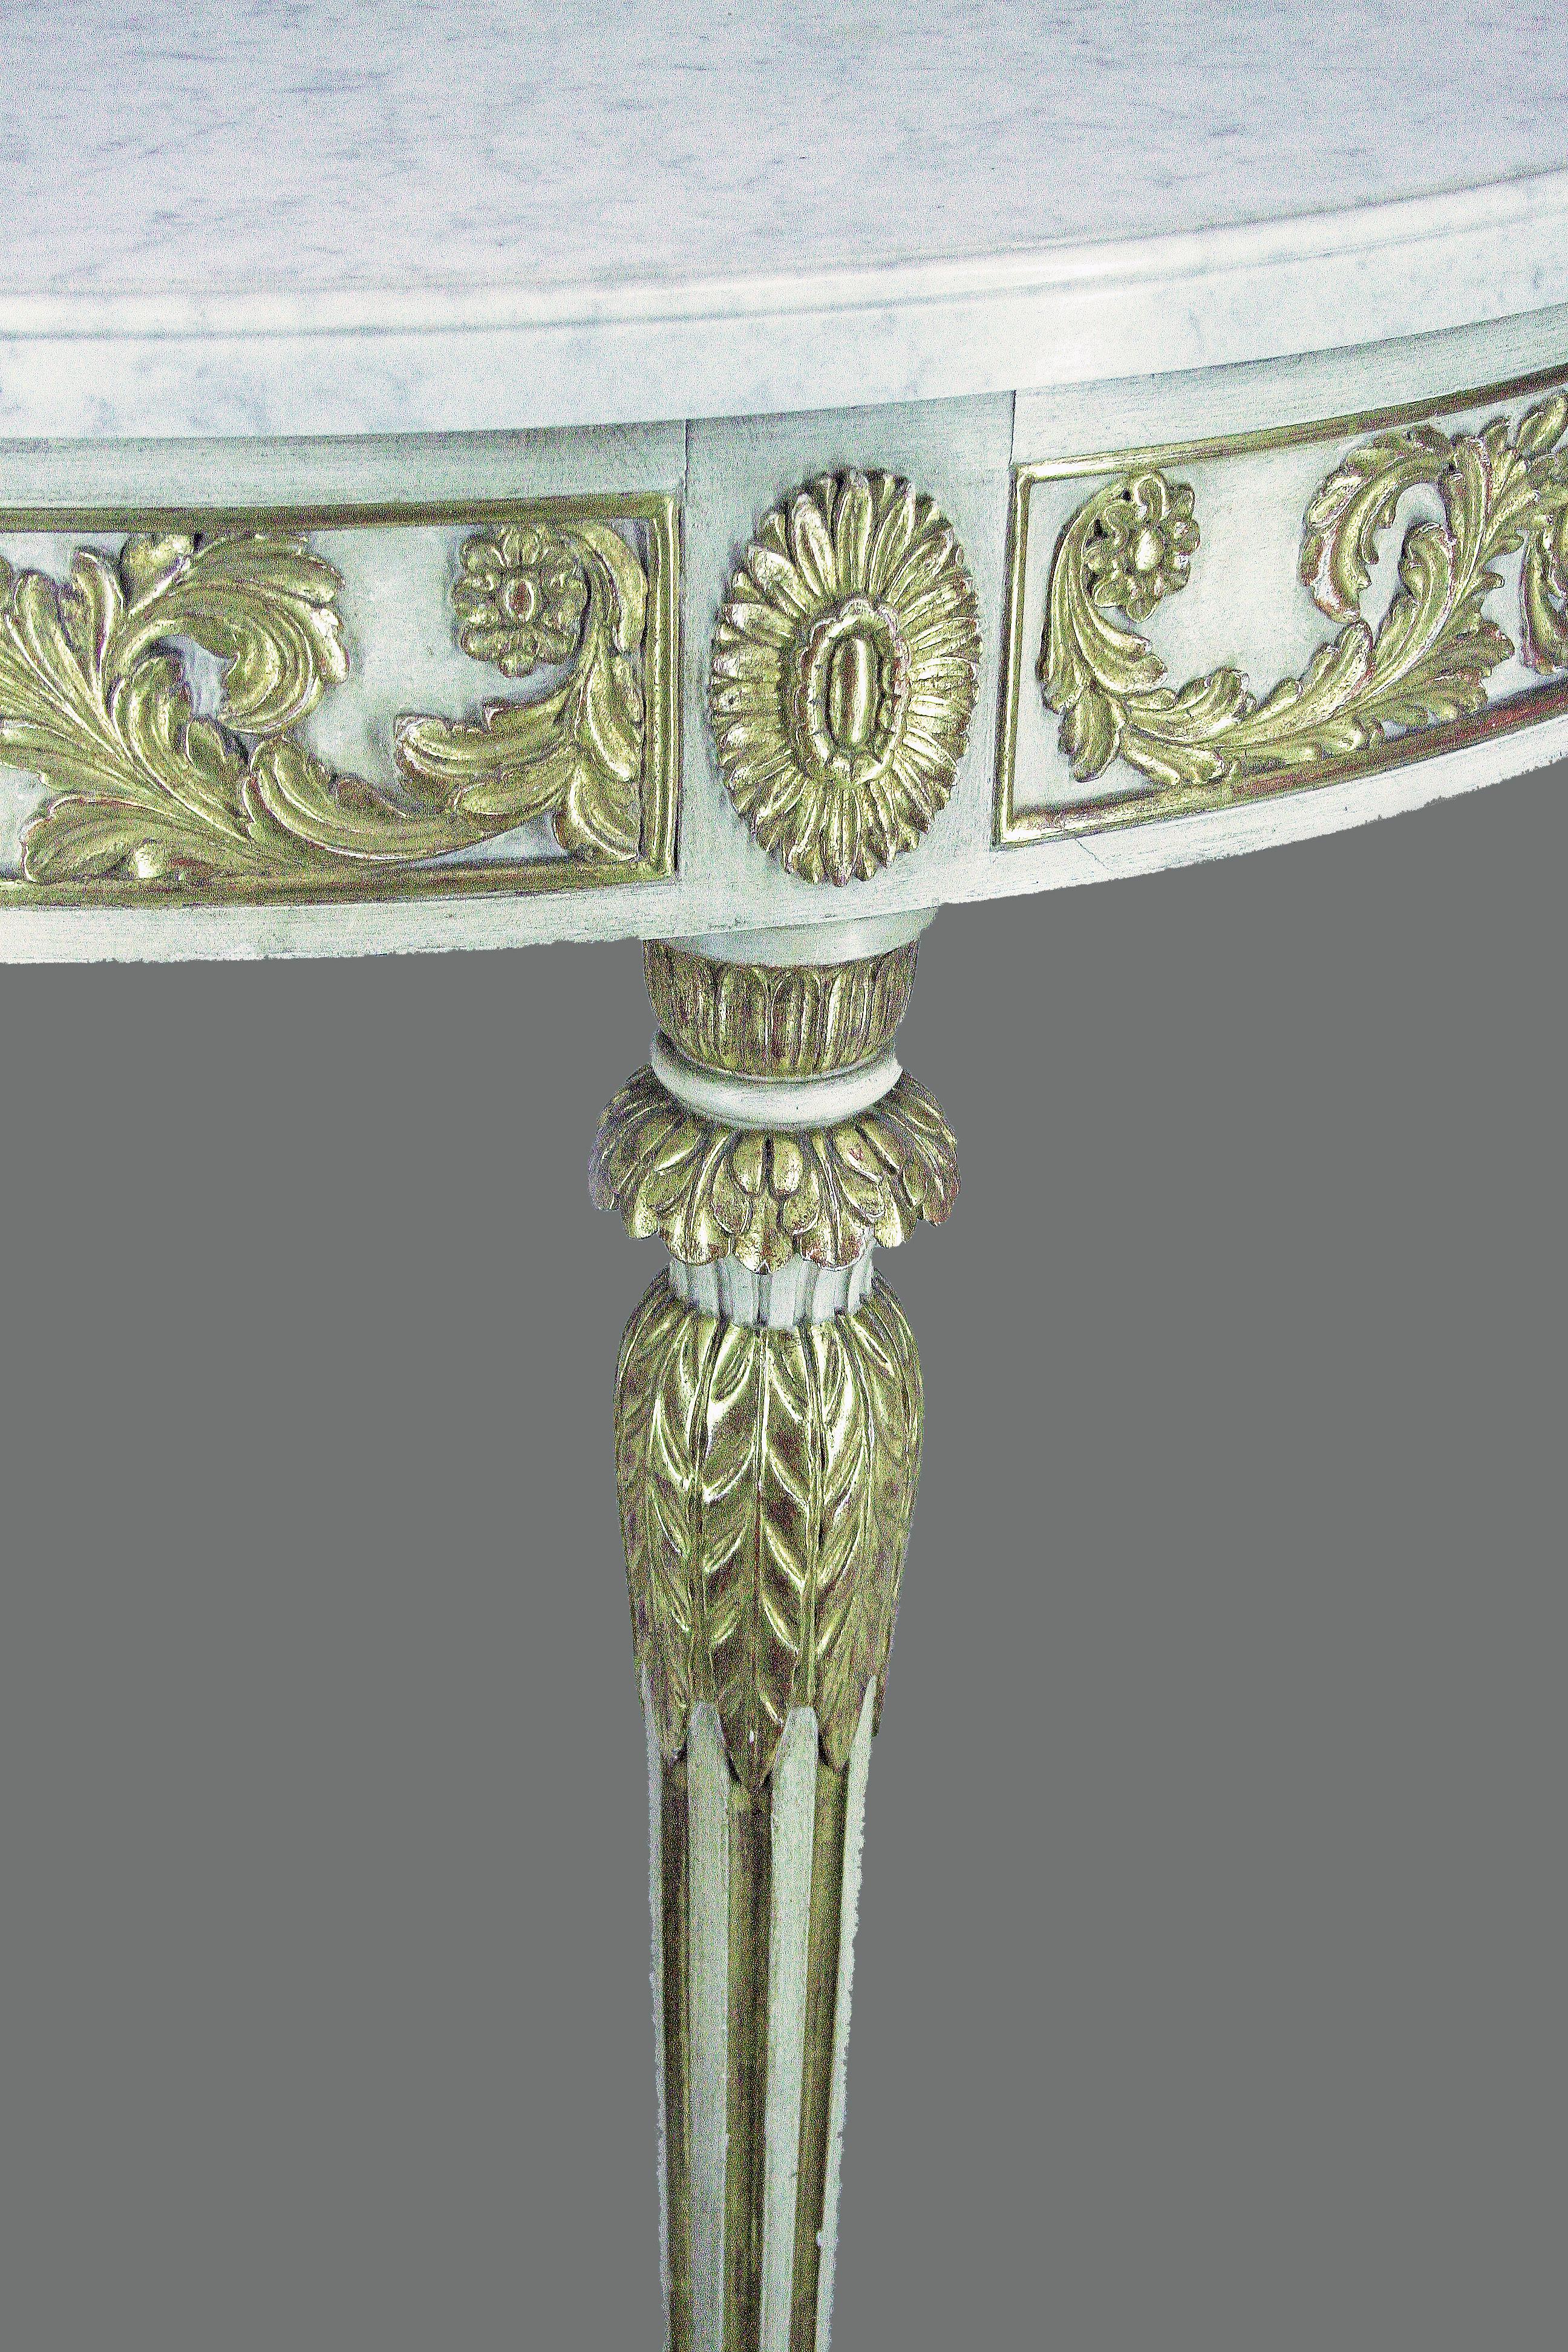 20th Century Mid-20th C. Argentine Giltwood and Marble Demi-Lune Console by Maison Jansen For Sale